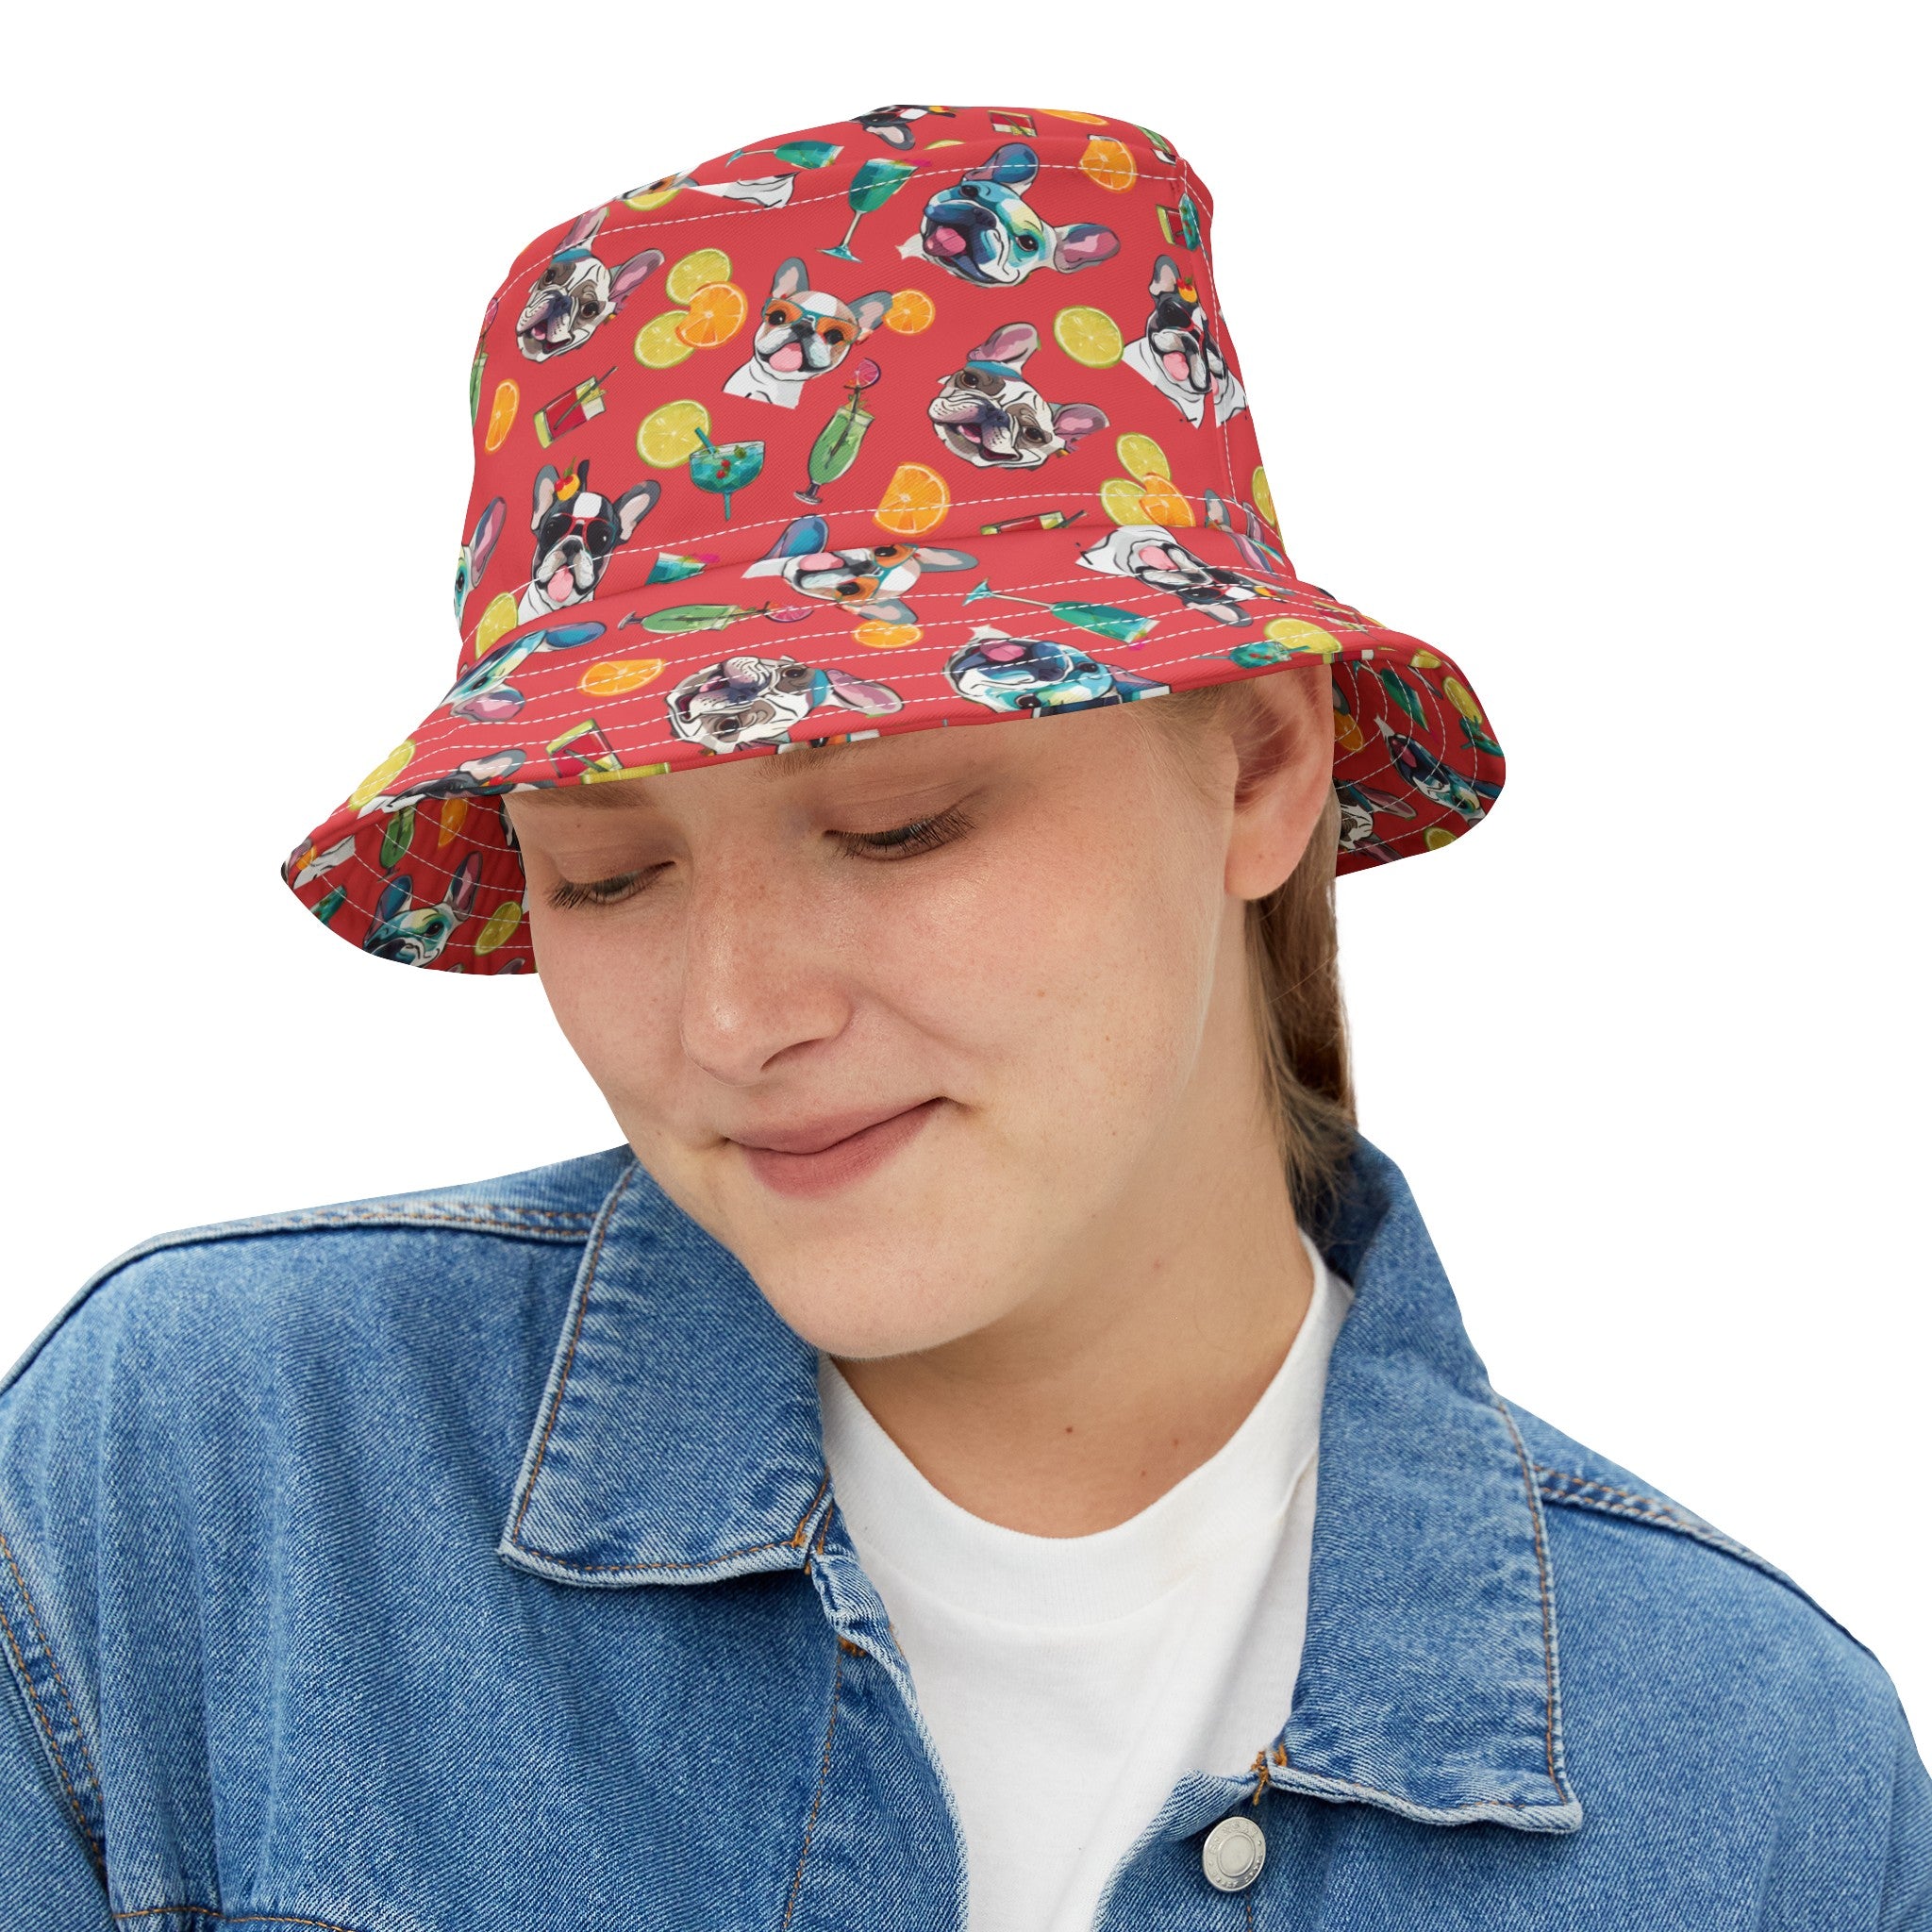 Tipsy Bully Unisex Summer Cocktail Bucket Hat (French/Pinkish Red)